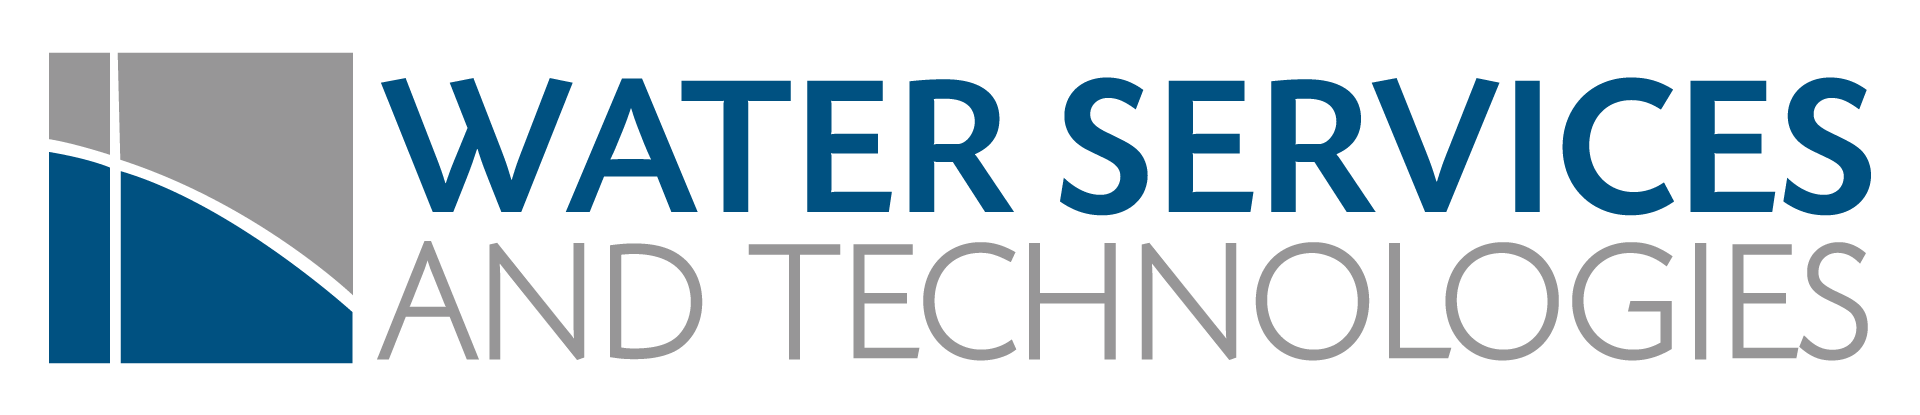 Water Services and Technologies Ltda